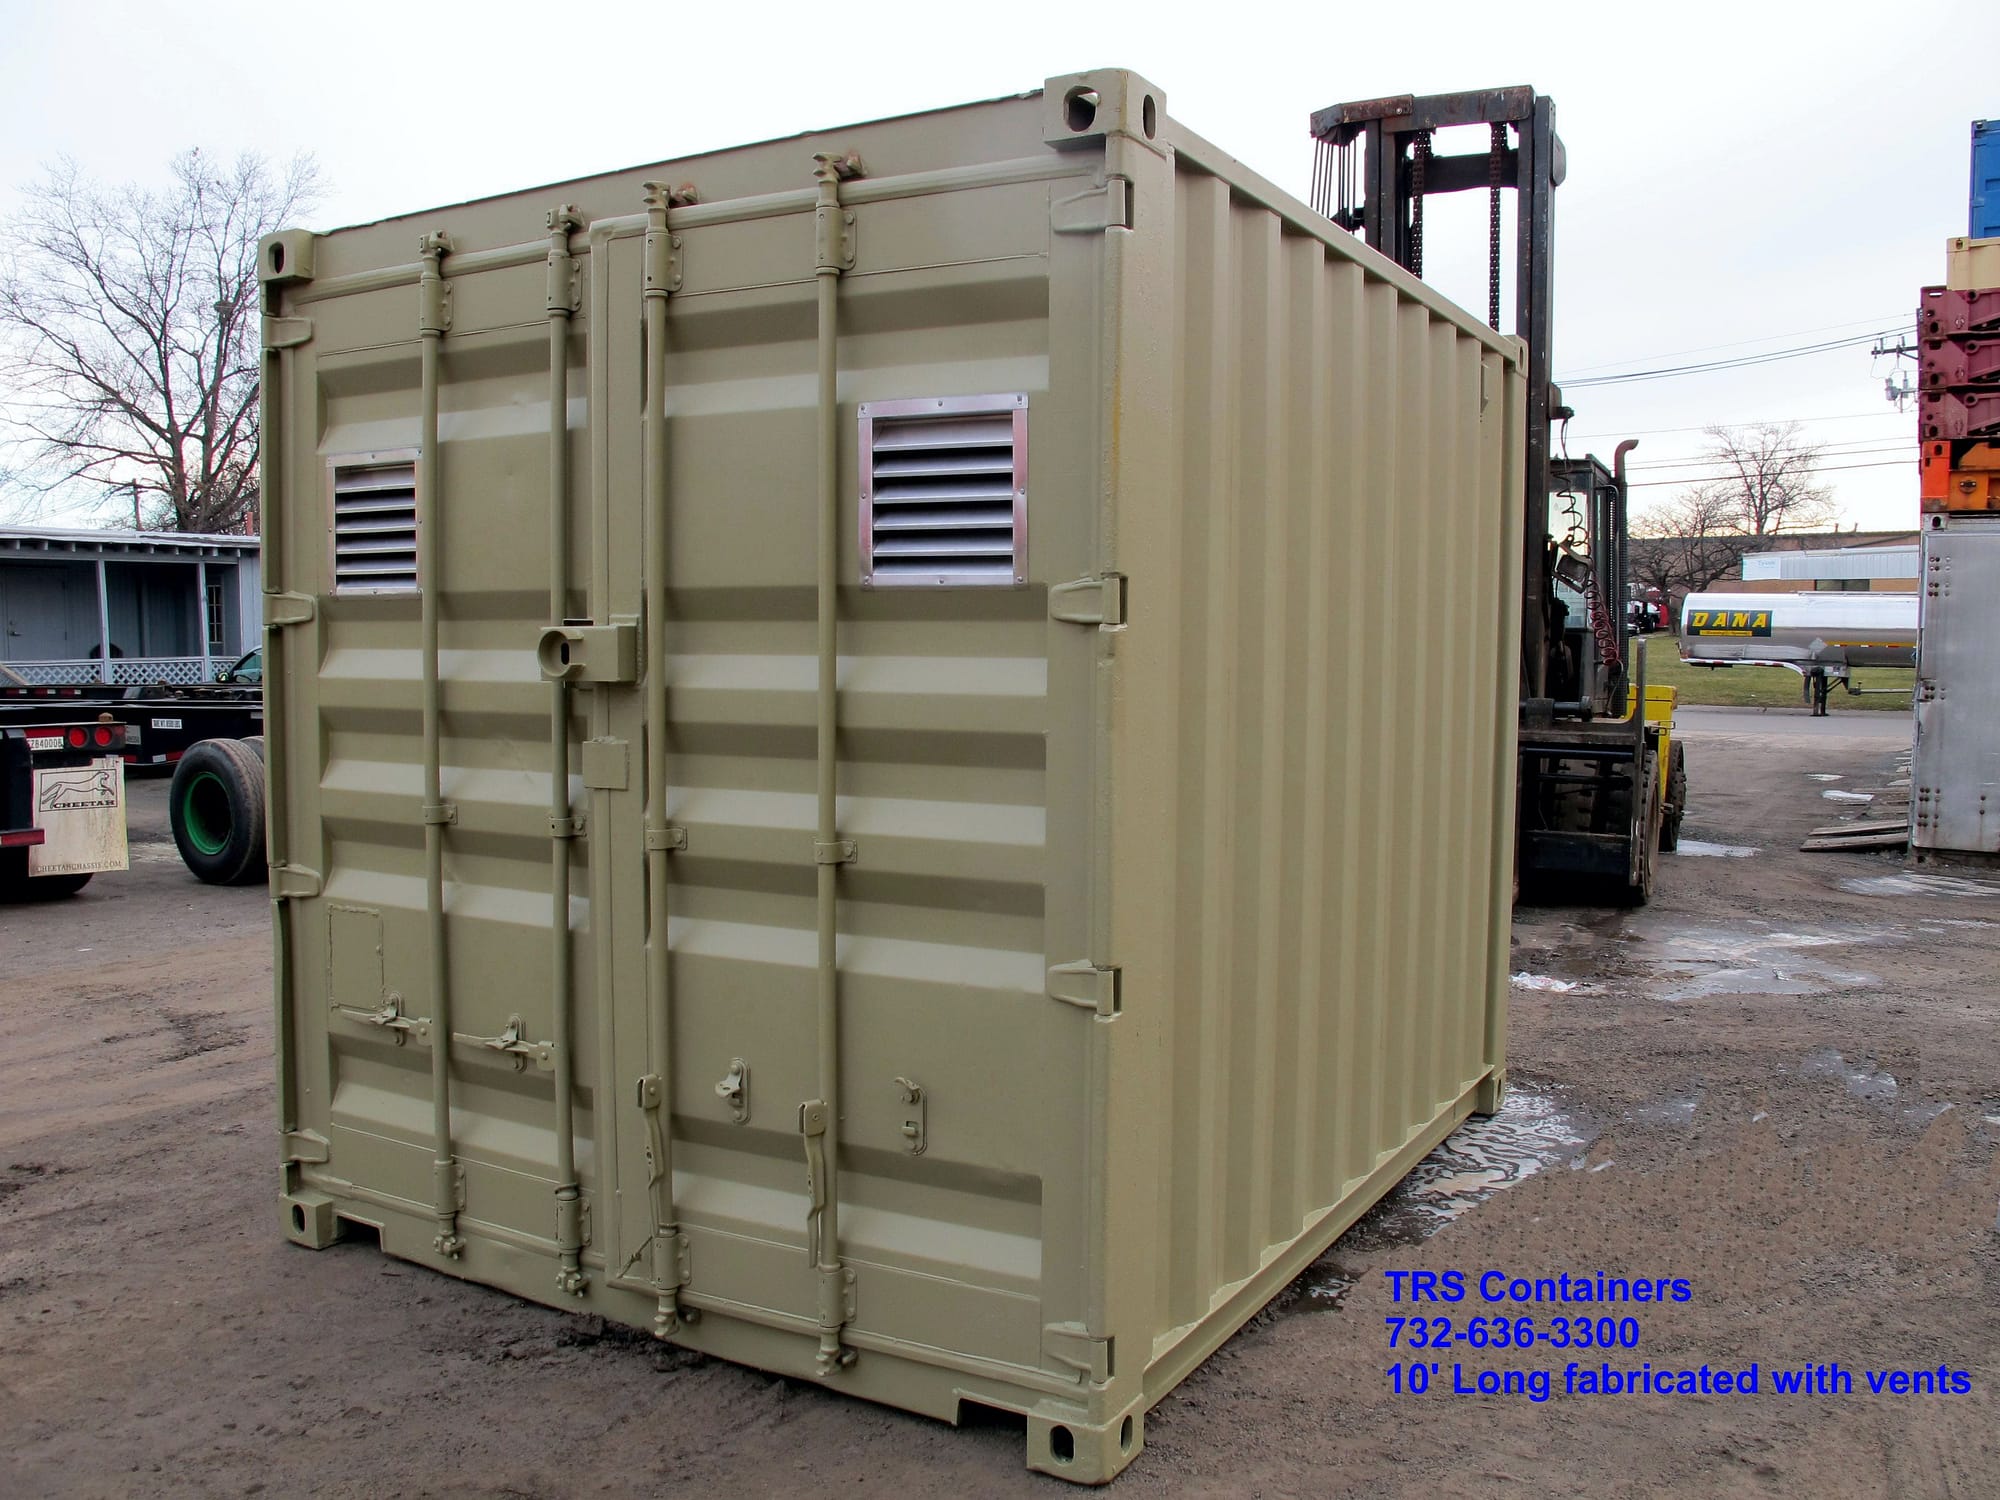 Need small secure storage on a job, TRS sells and rents 10ft long containers